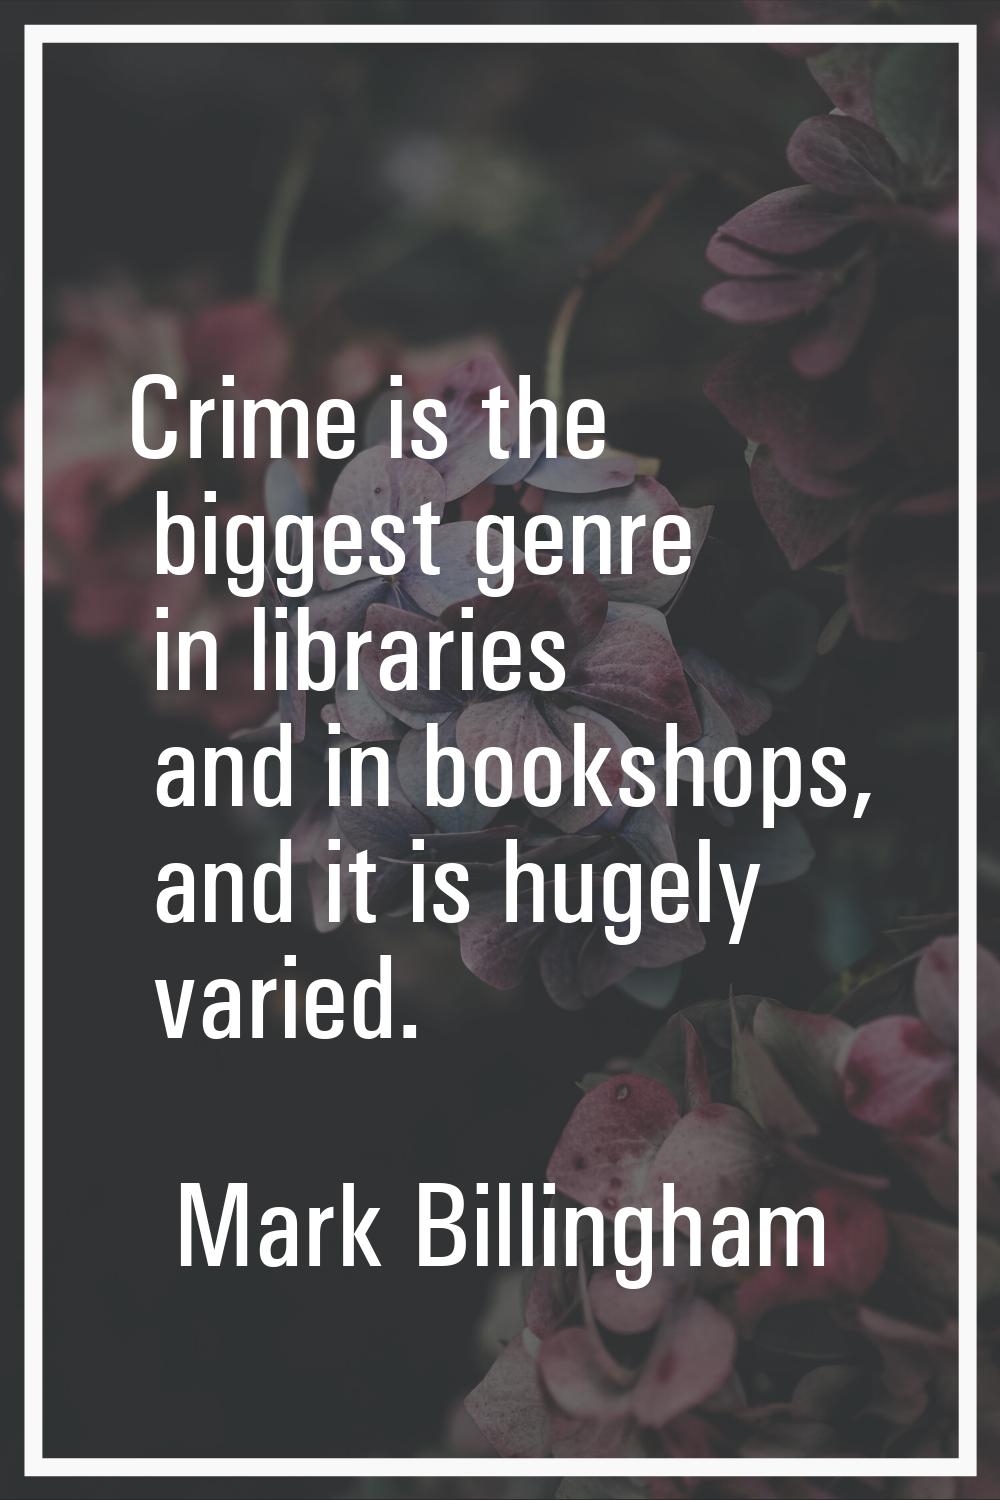 Crime is the biggest genre in libraries and in bookshops, and it is hugely varied.